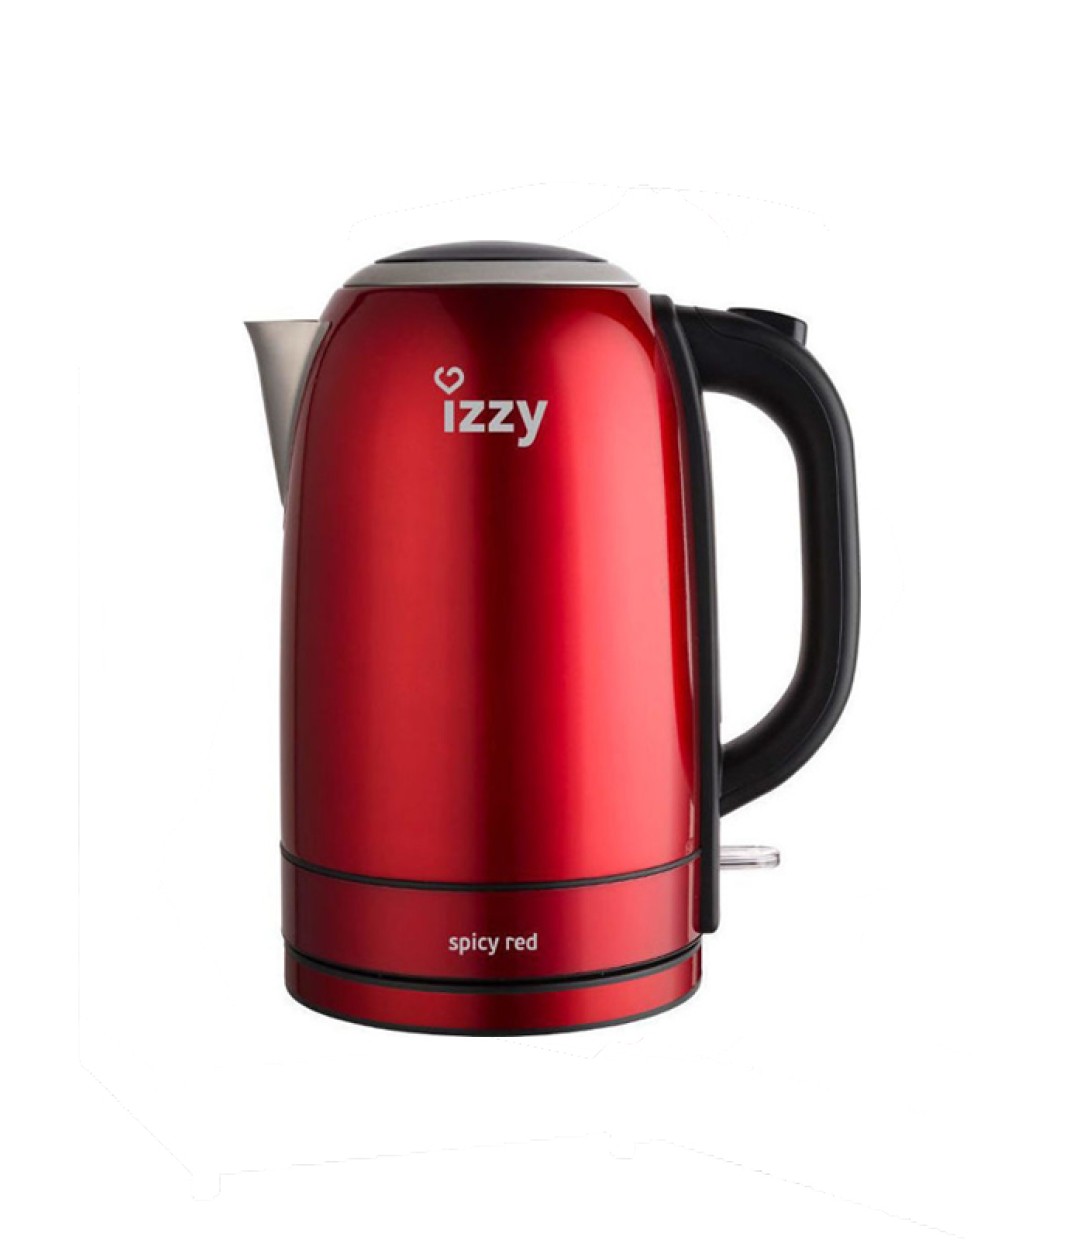  Izzy 1618 Spicy Red